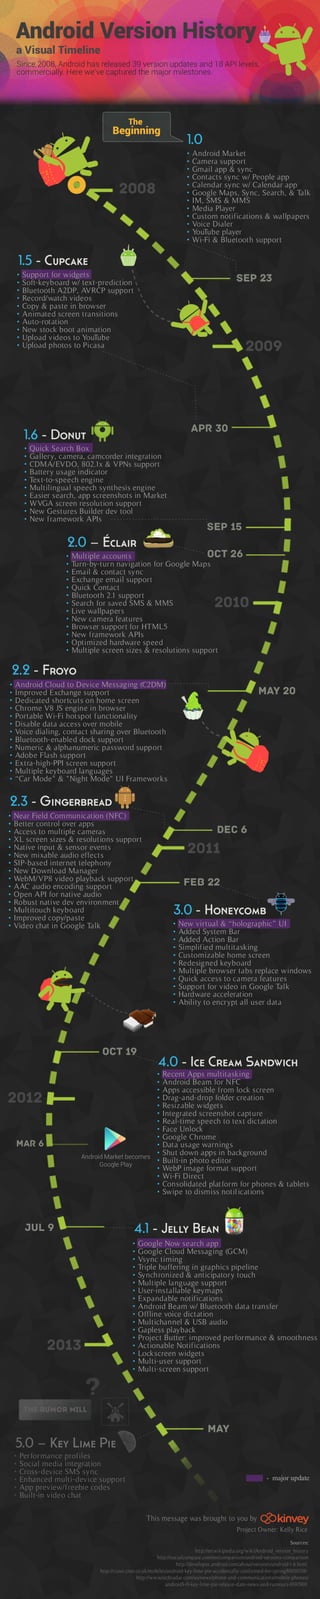 Android Version History, a Visual Timeline